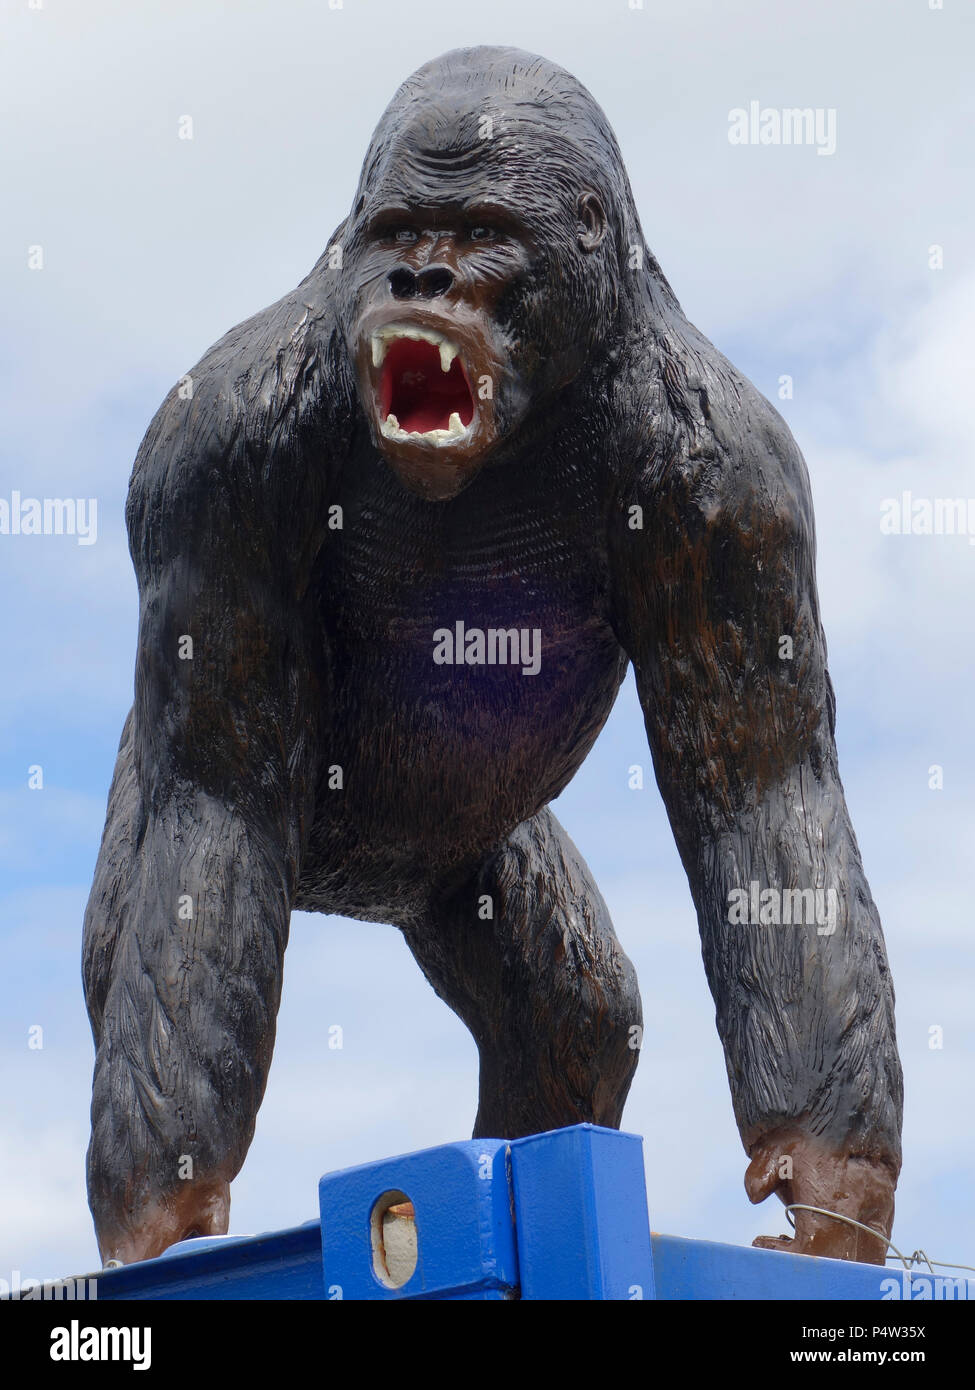 Angry Gorilla Stock Photos & Angry Gorilla Stock Images - Alamy